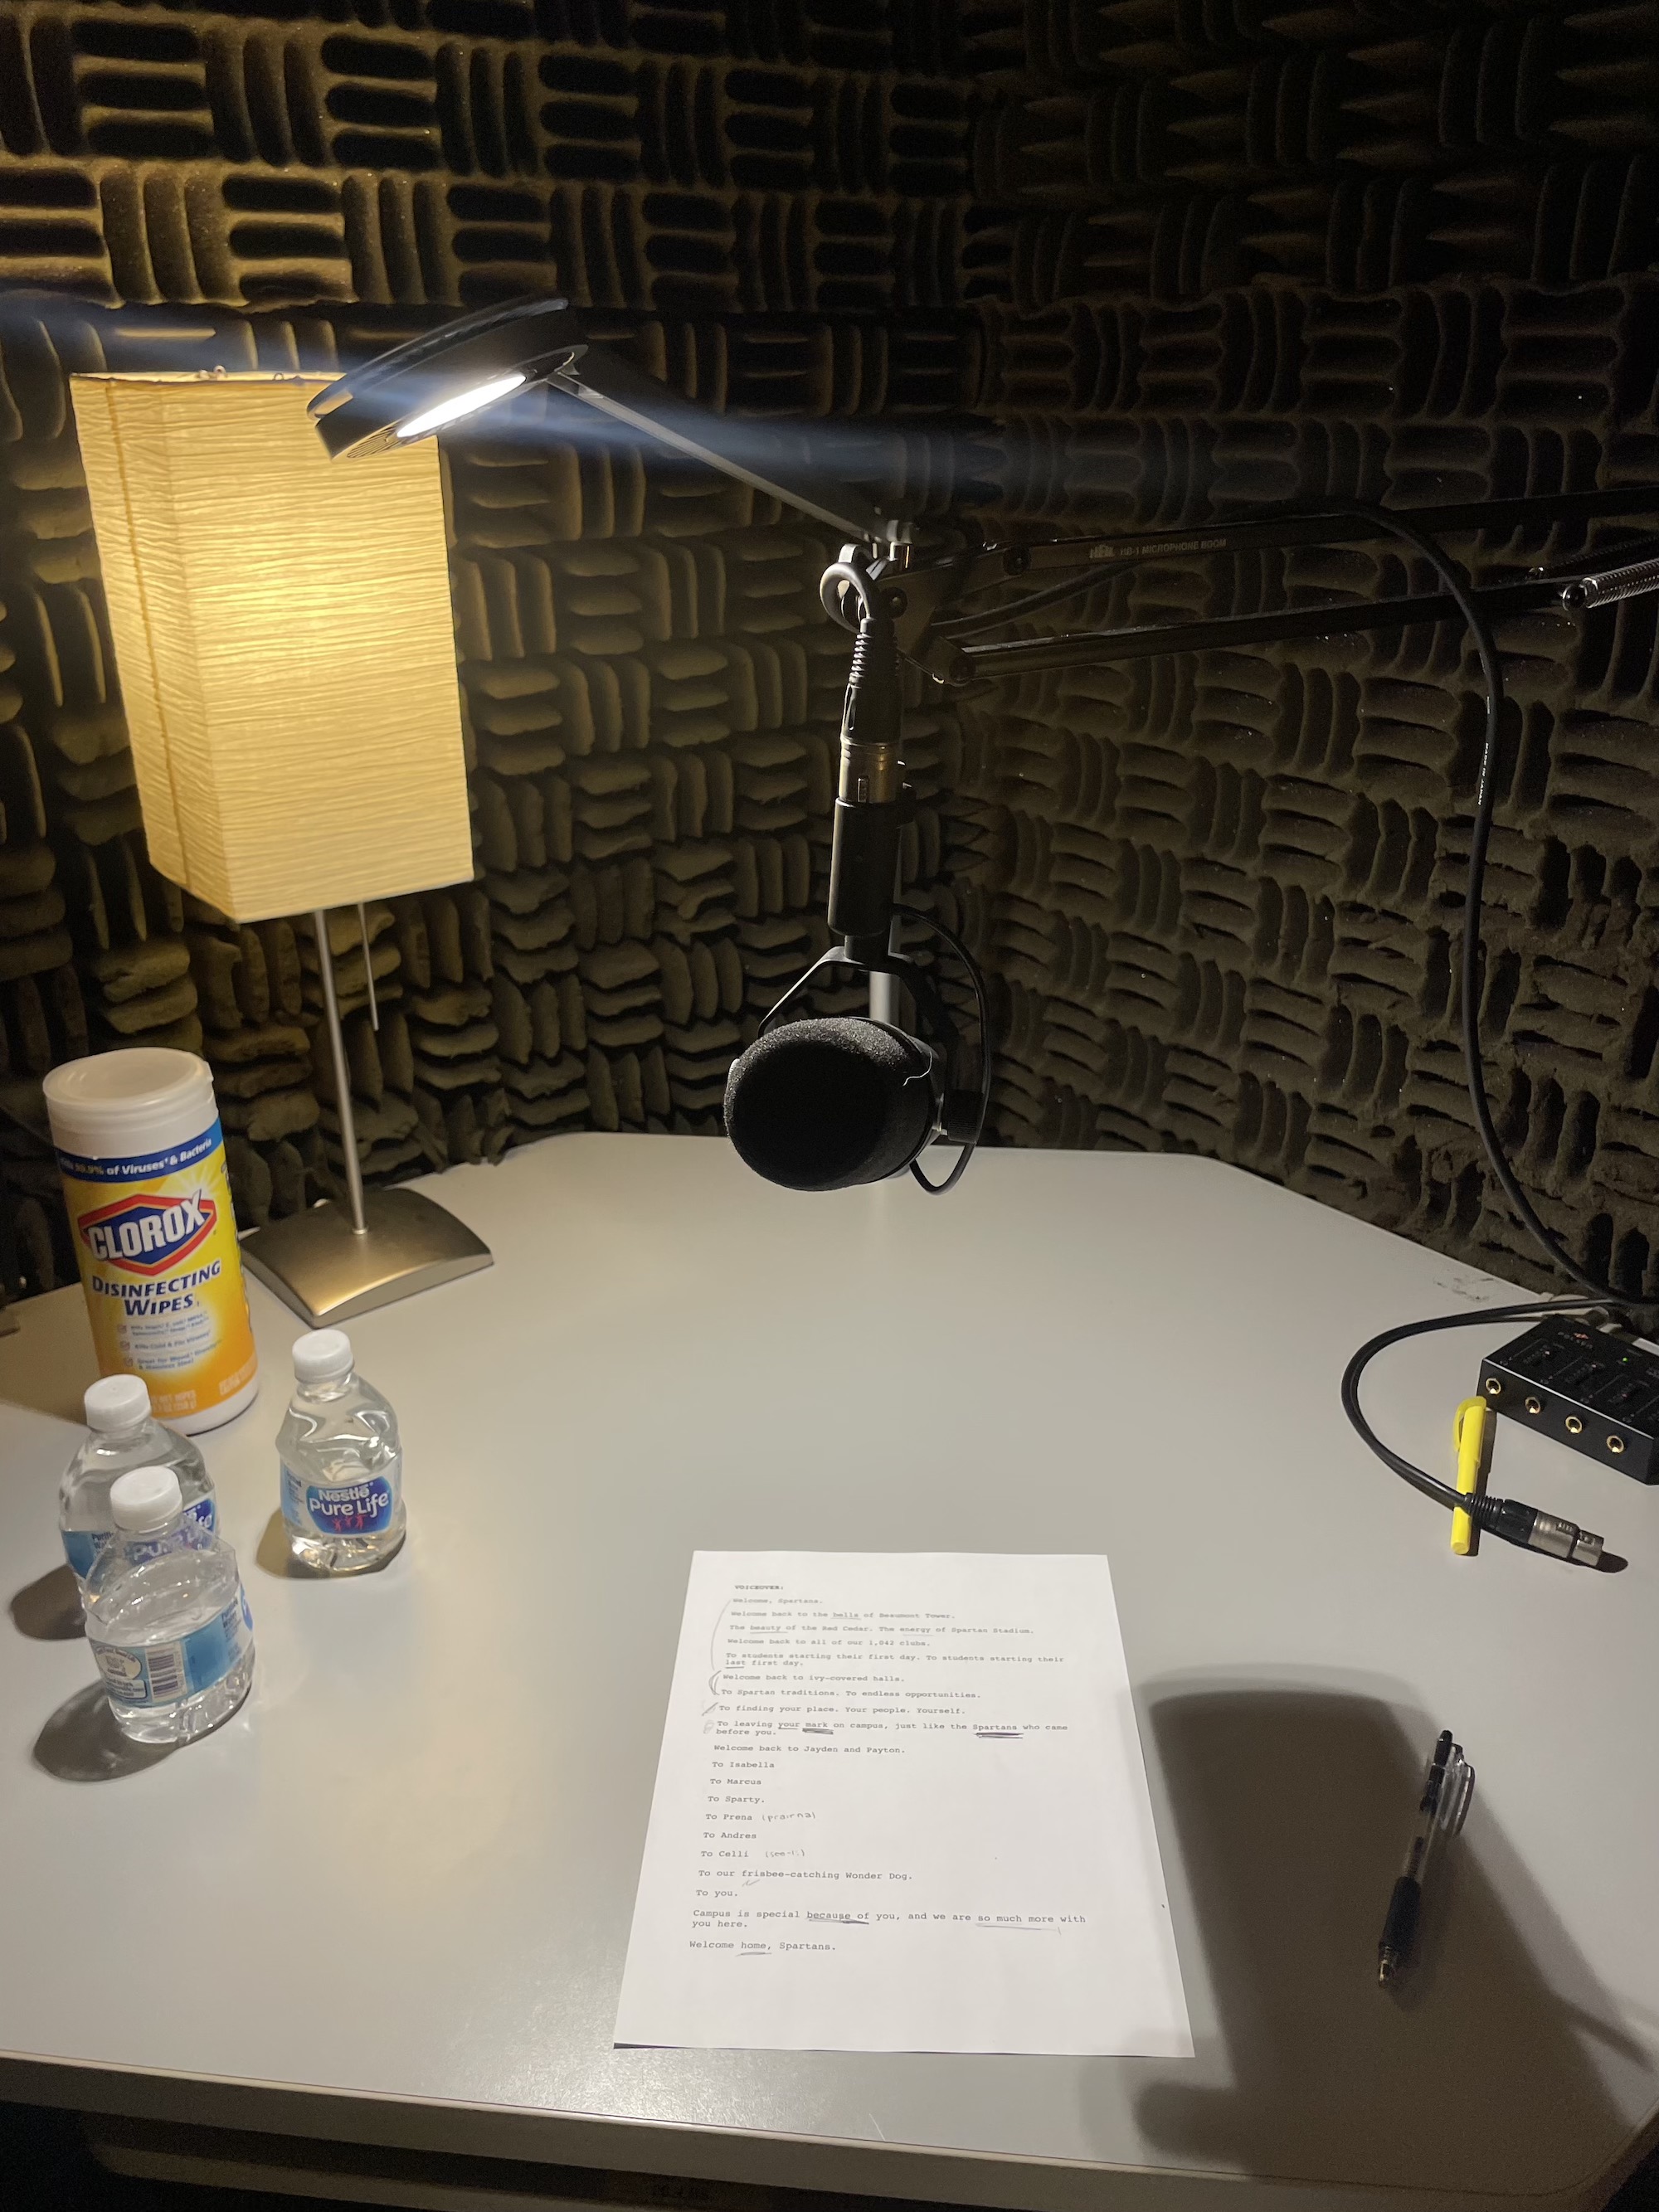 Microphone in recording studio with script underneath it